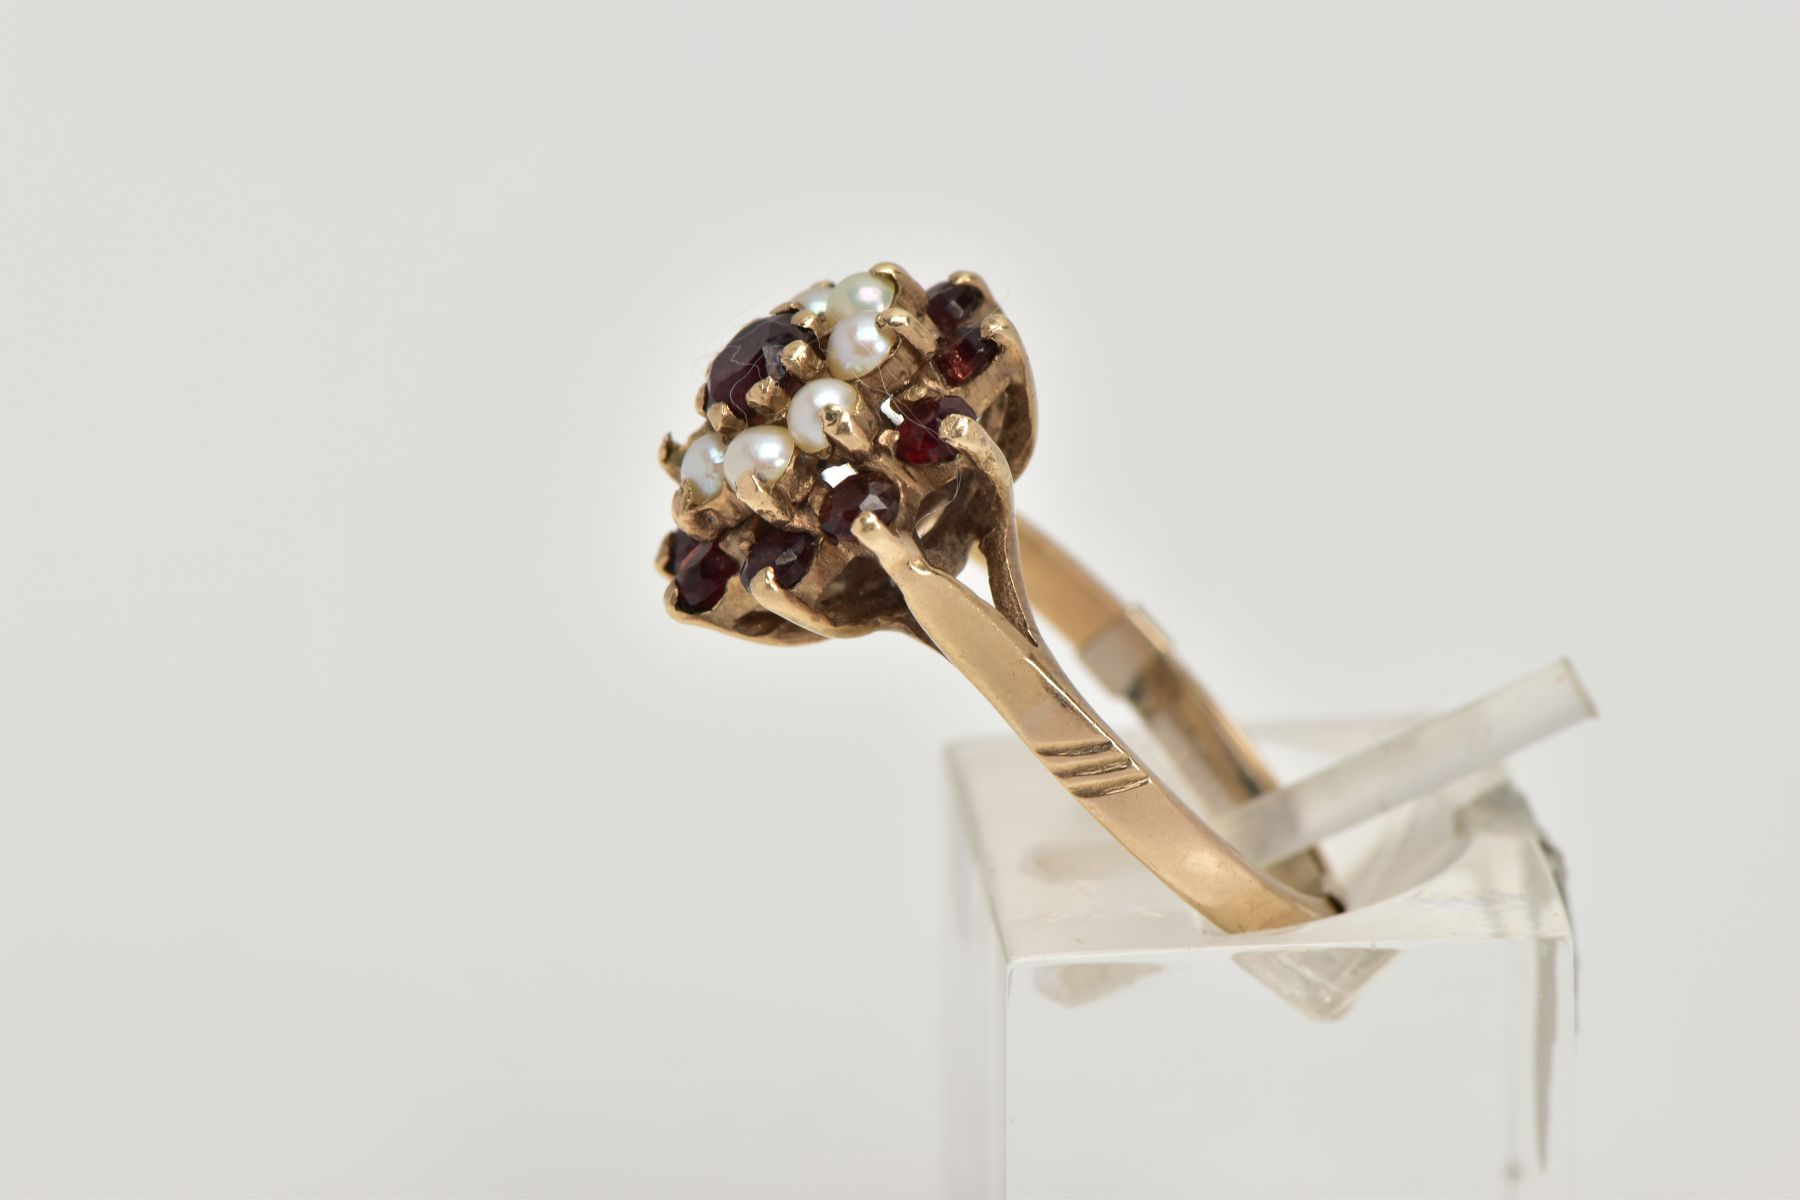 A GEM CLUSTER RING, designed as a tiered cluster of claw set red gems assessed as garnets and - Image 2 of 4